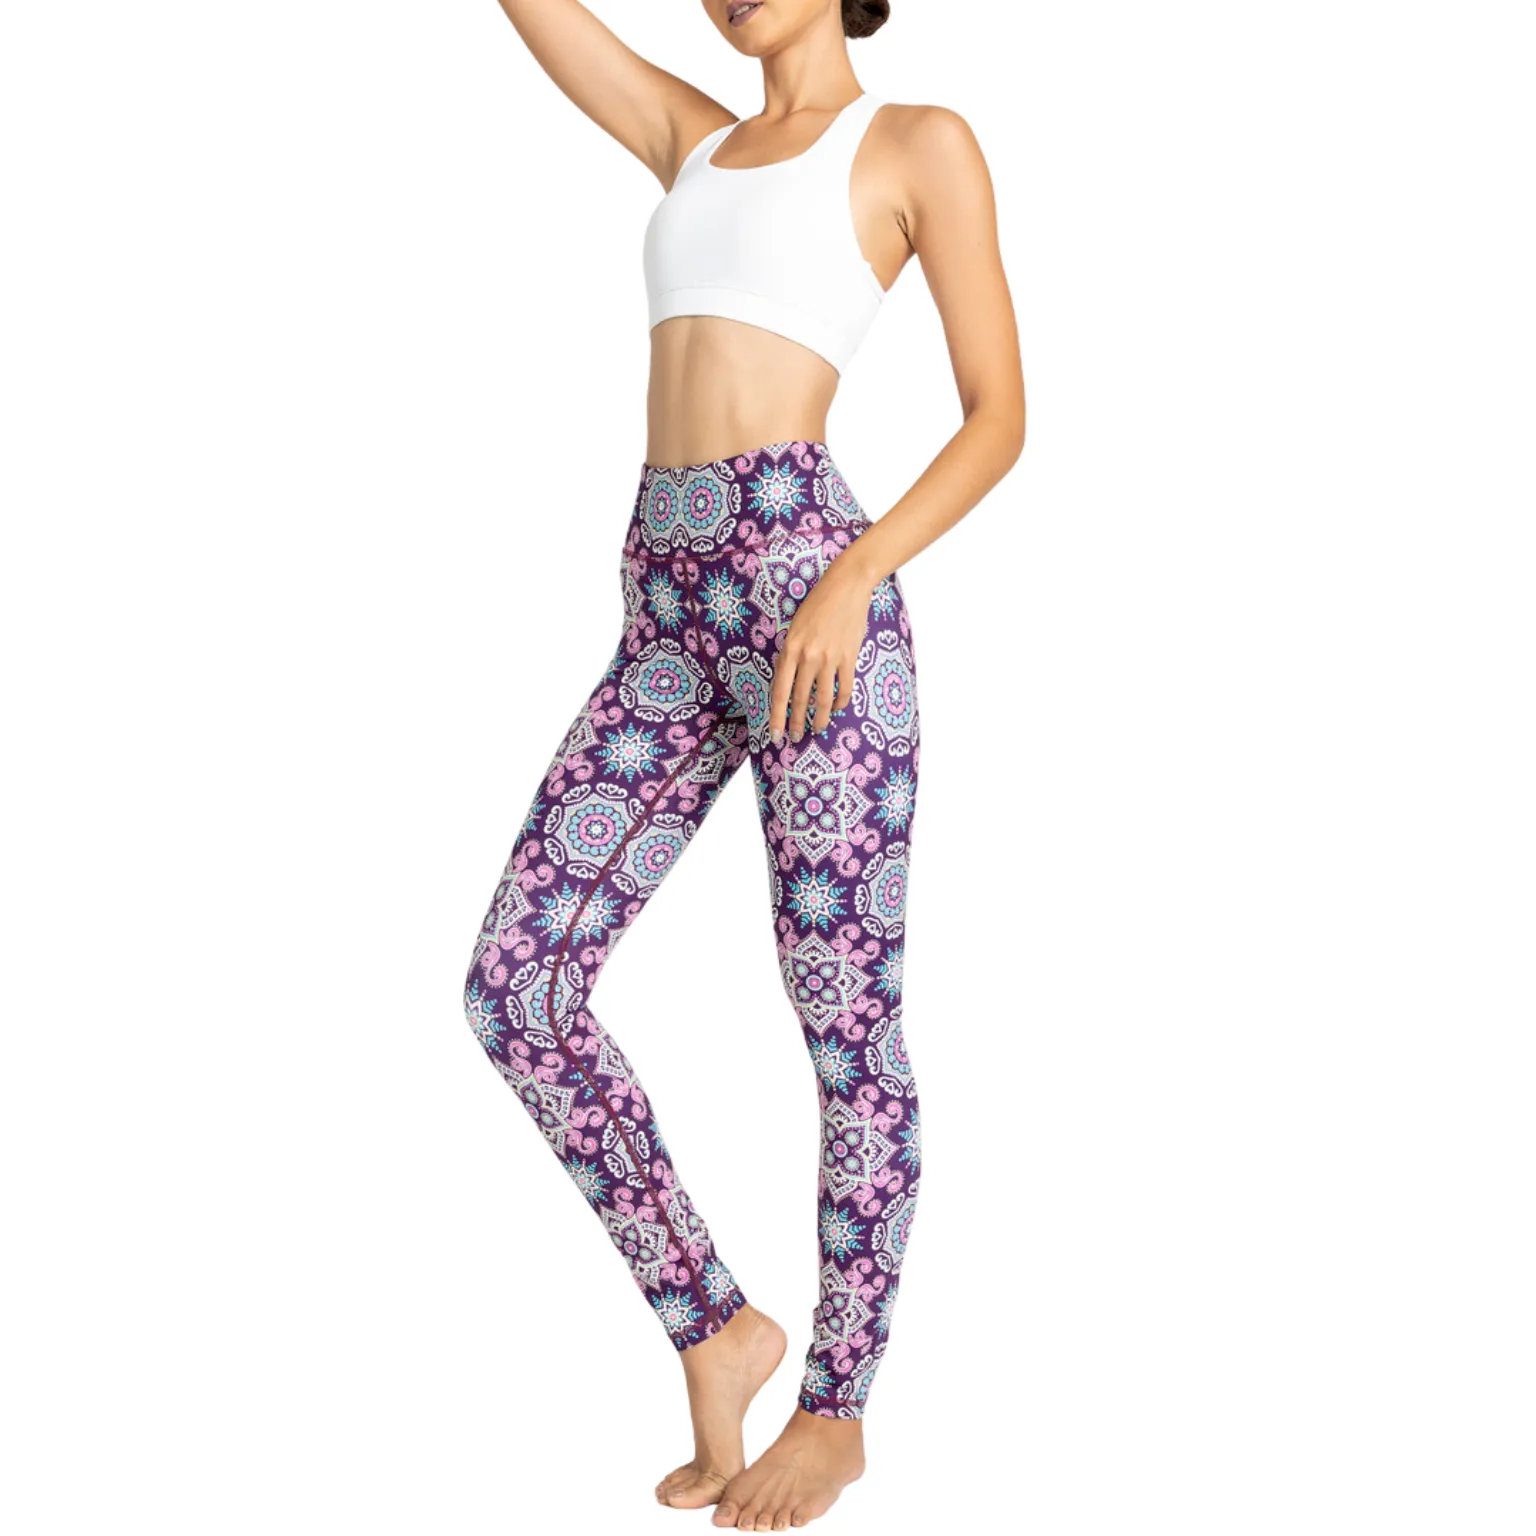 Printed Yoga Leggings manufacturing with recycled materials